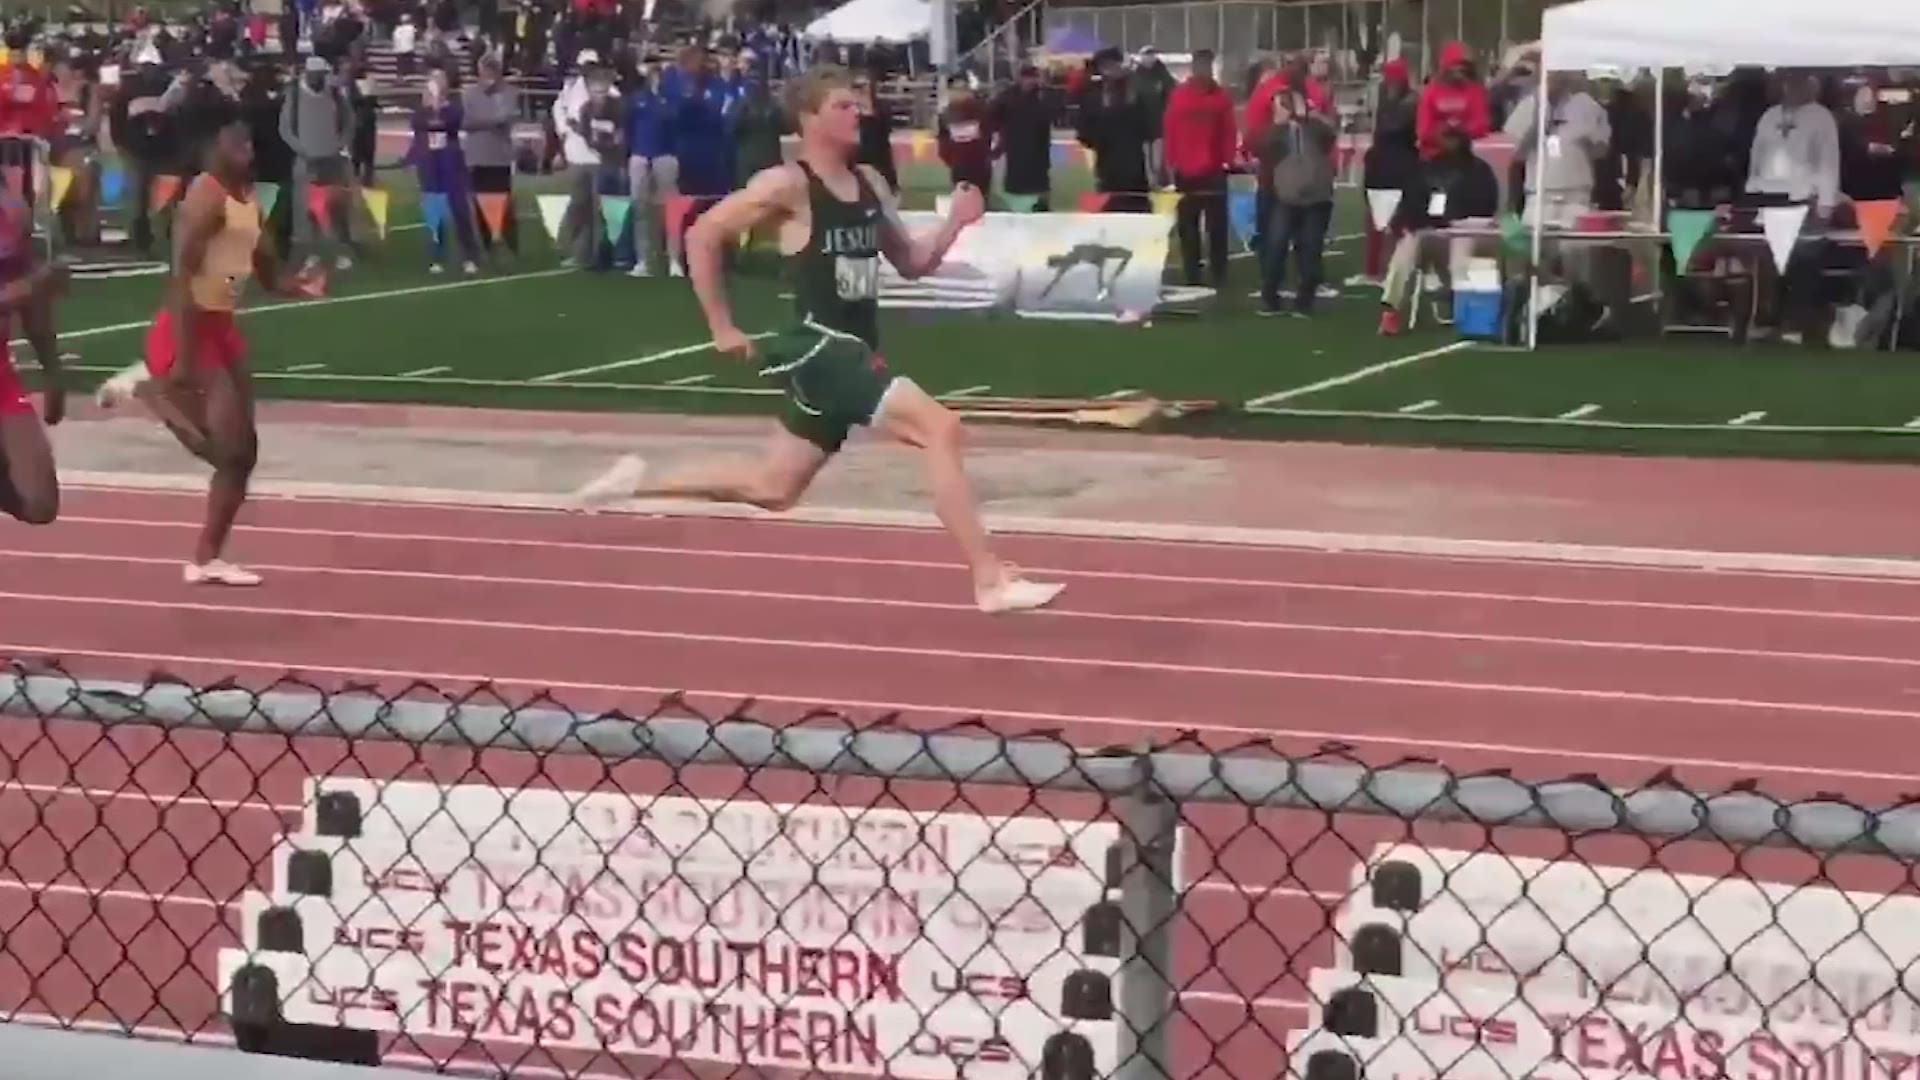 The fastest sprinter in America lives right here in Houston. He's a senior at Strake Jesuit.